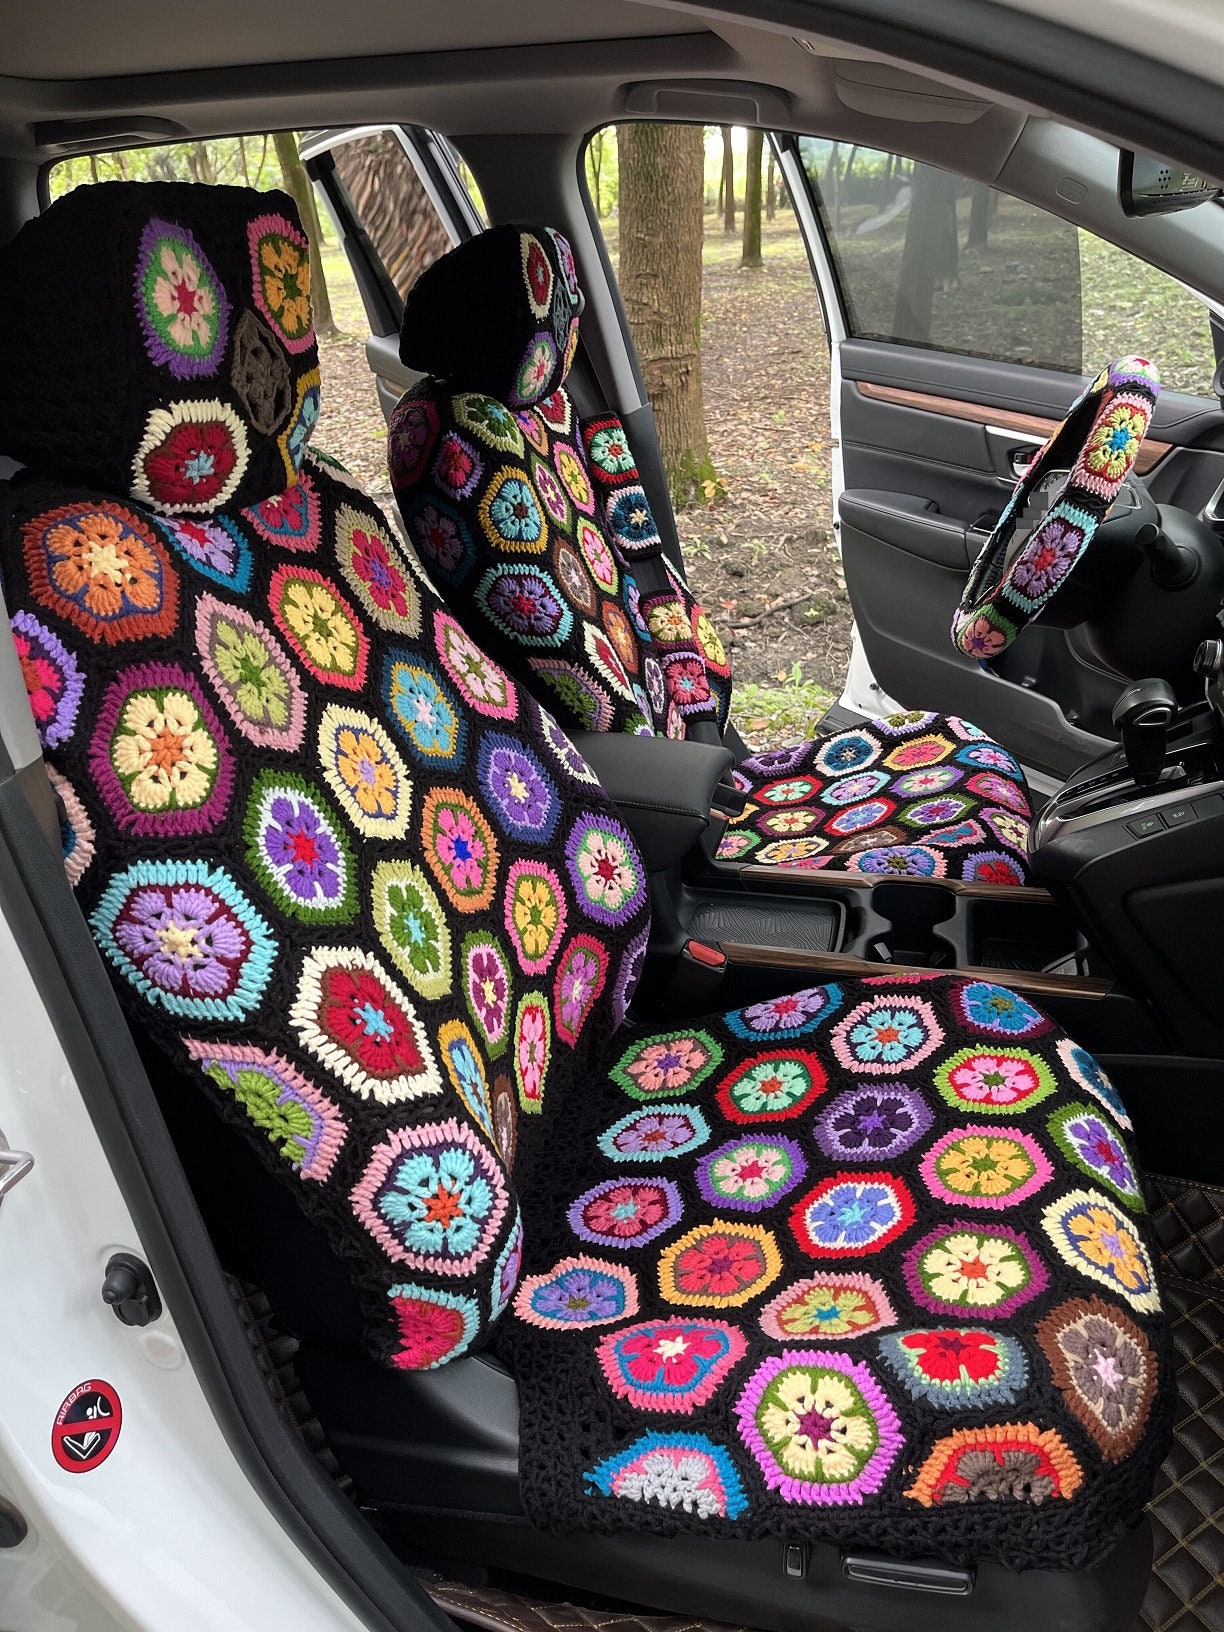 Car Seat Cover,crochet Seat Covers,rainbow Granny Square Steering Wheel  Cover Seat Cover Headrest Covers Car Accessories,car Interior Design 